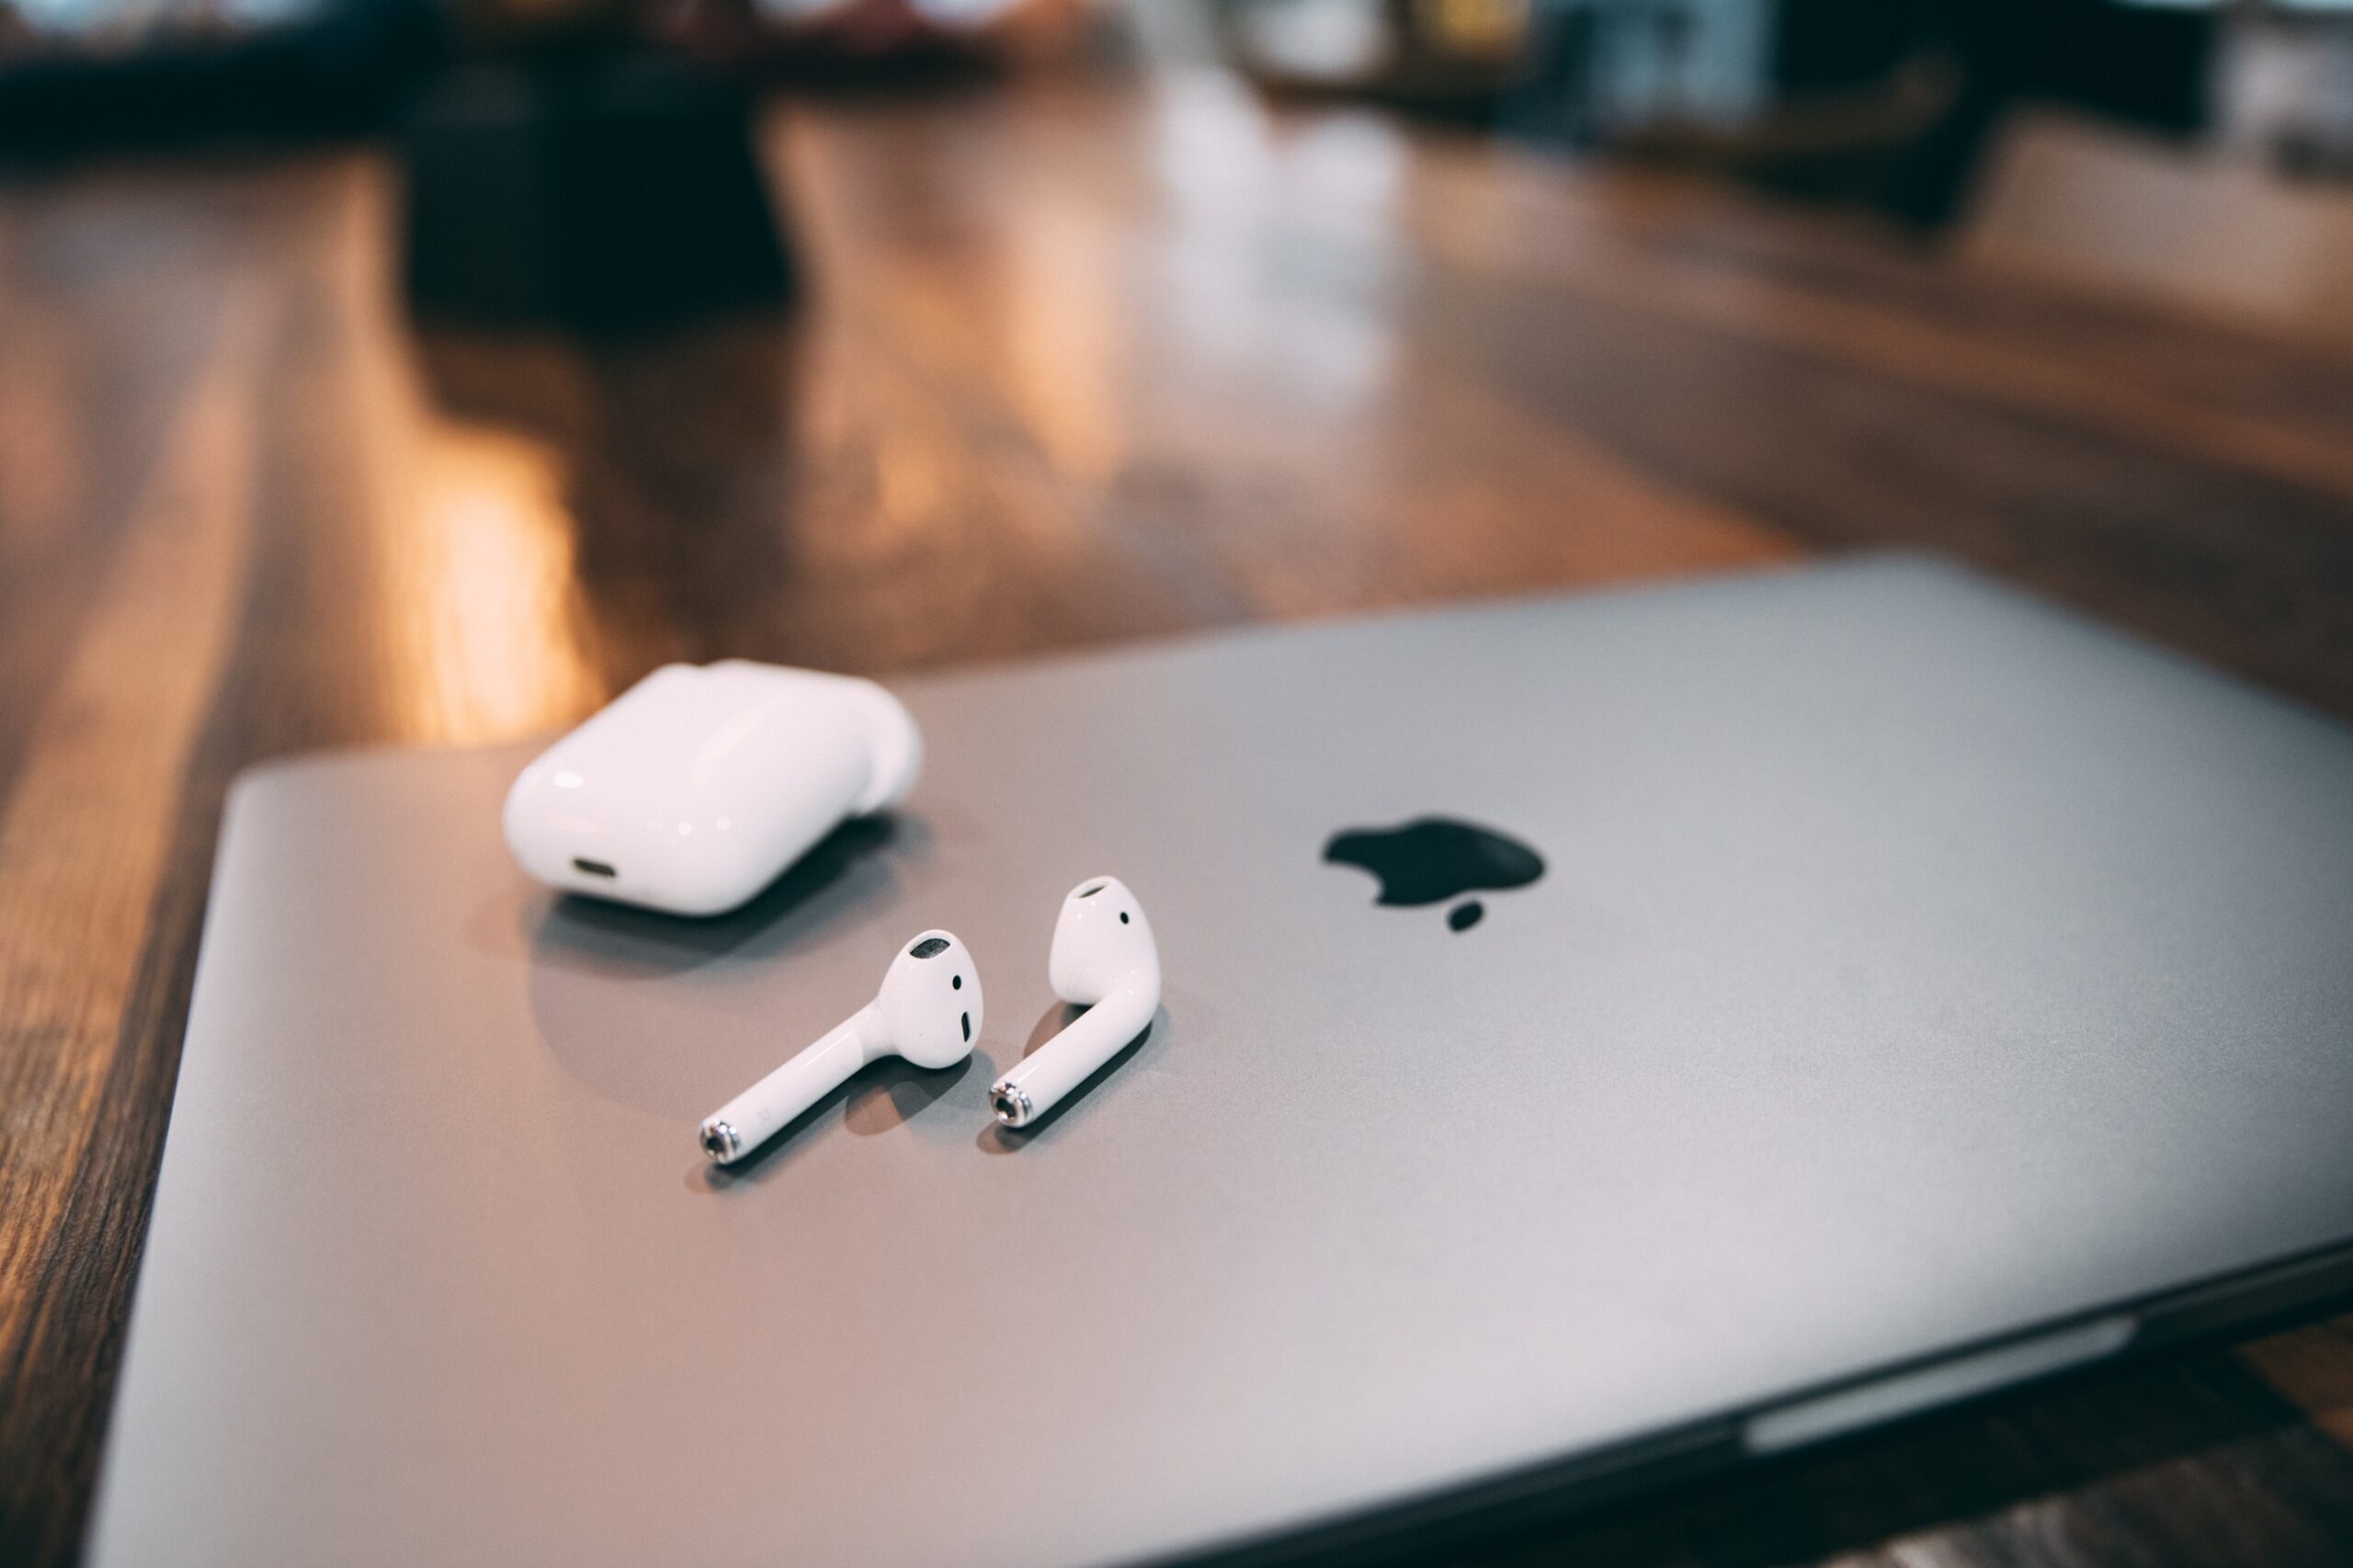 How To Connect Airpods To Laptop?